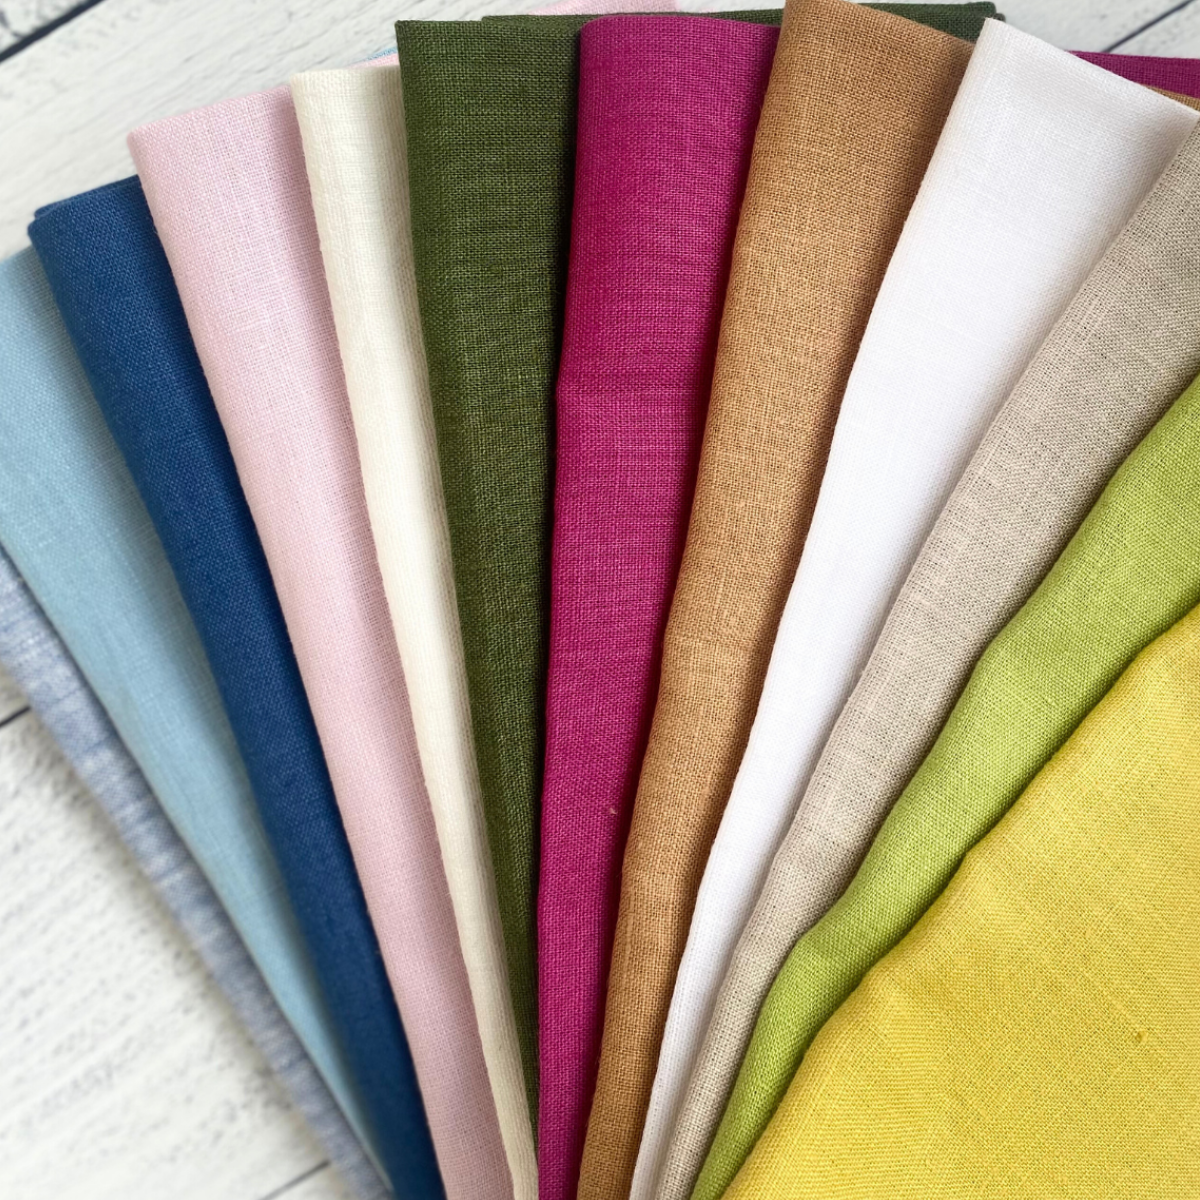 Set of Linen Fabric Samples - Flax Linen Swatches